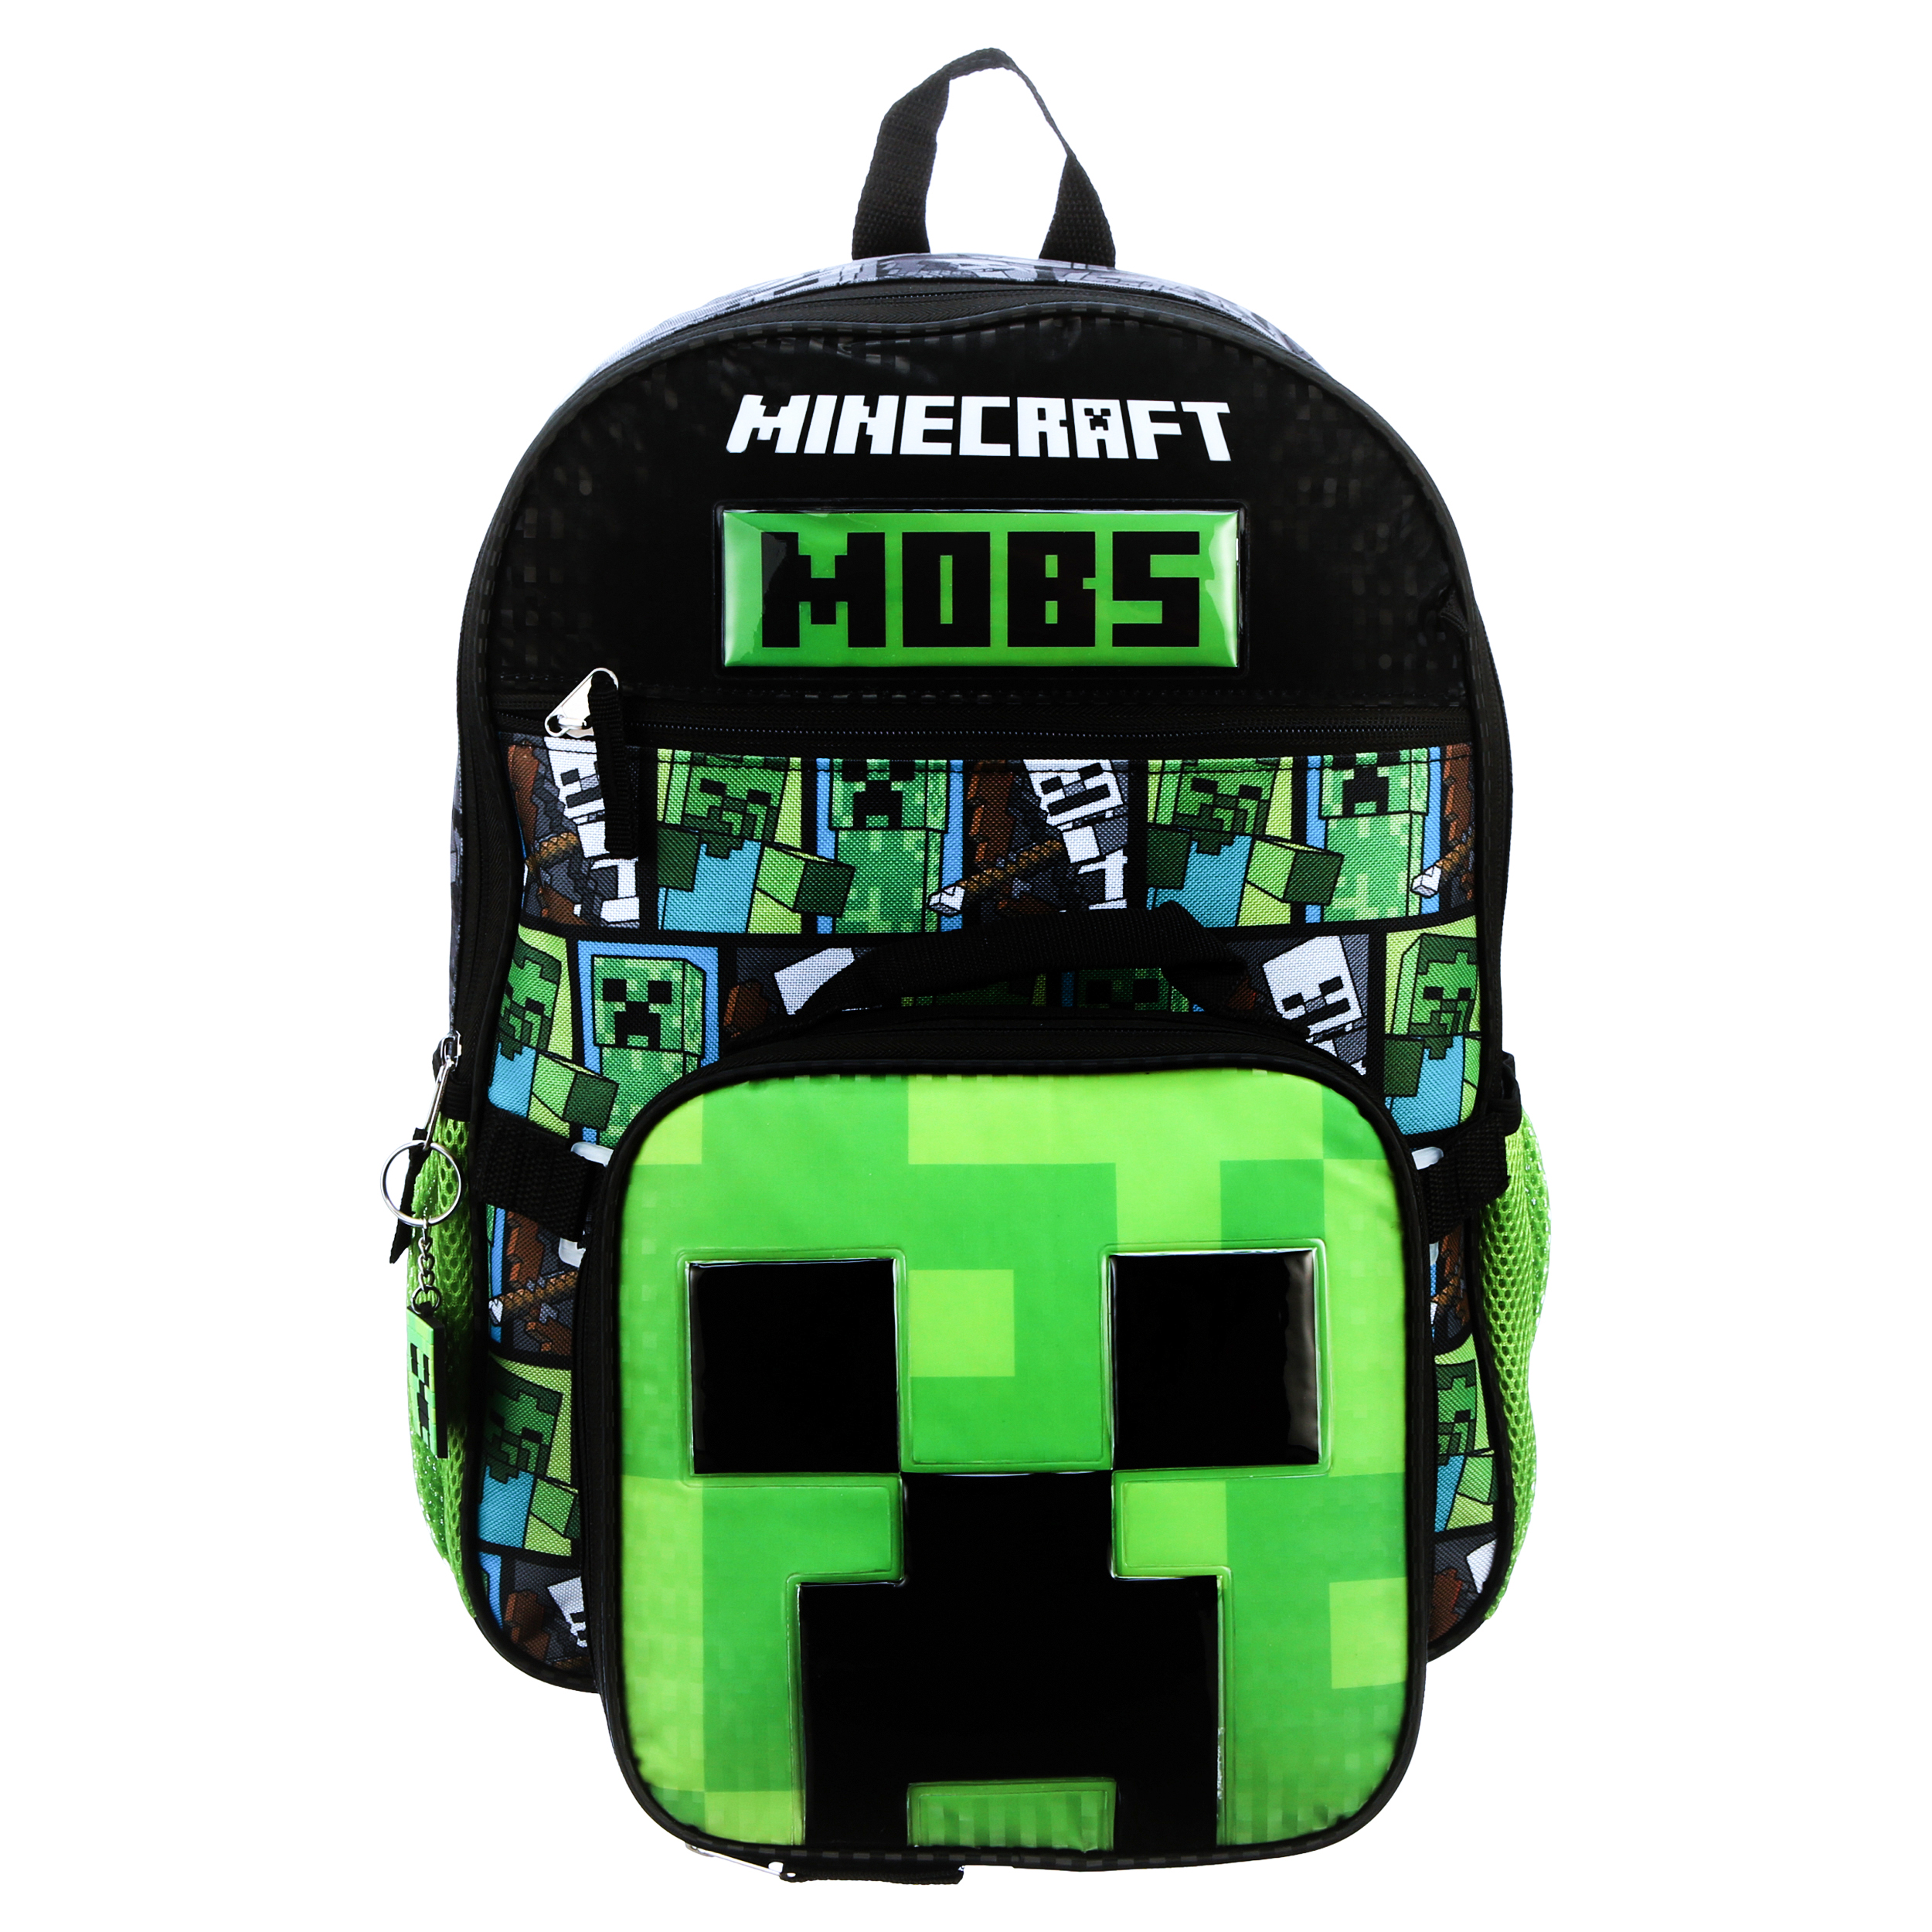 Minecraft Backpack Set, 5-Pieces - image 5 of 8